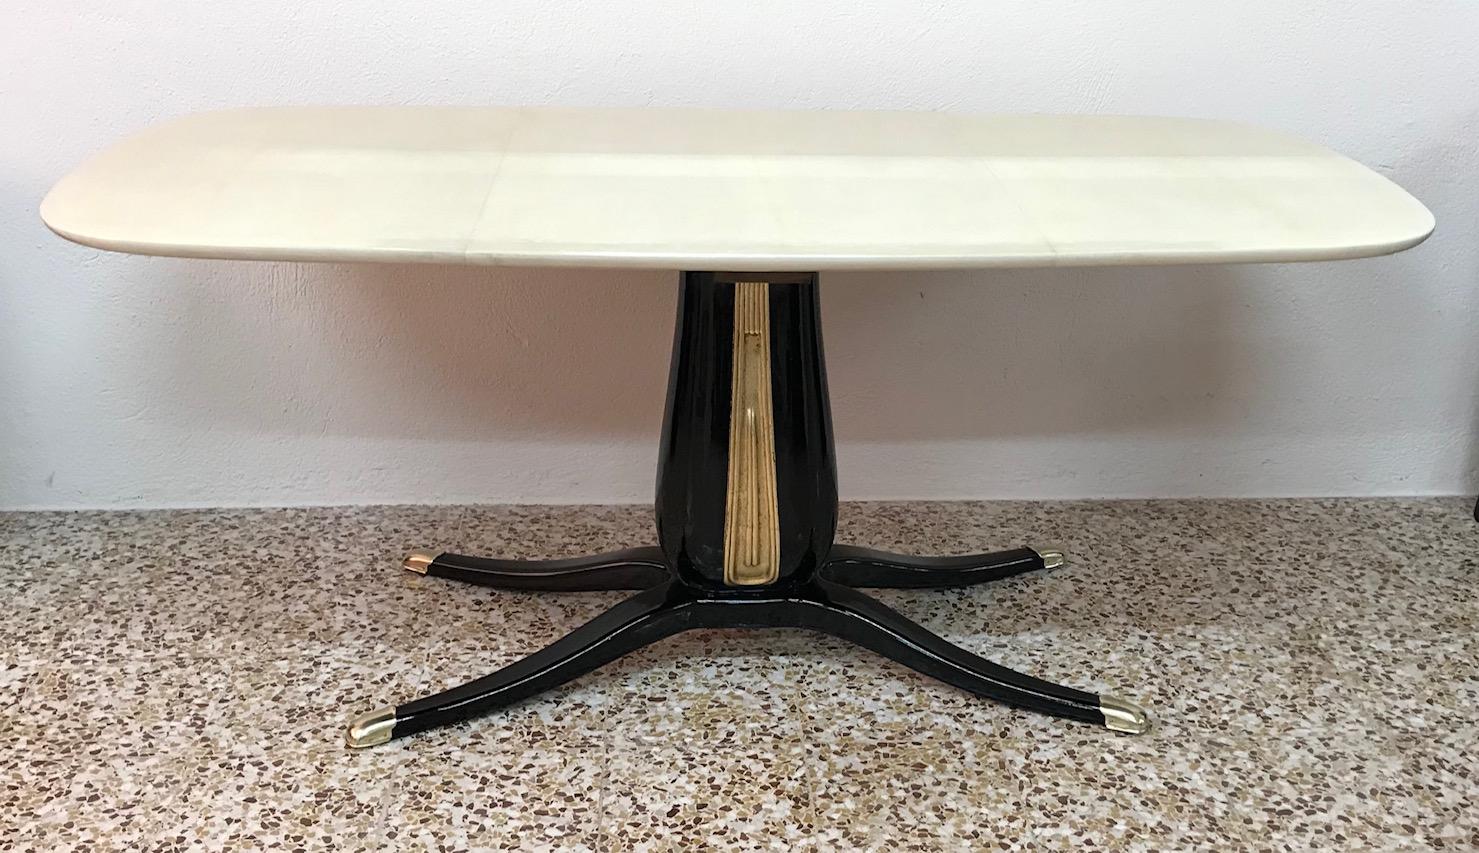 This table was produced in the 1950s in Italy in the manner of Osvaldo Borsani.
The top is completely covered with fine parchment while the base is black lacquered with the central part in gold leaf.
The tips of the legs are made of brass.